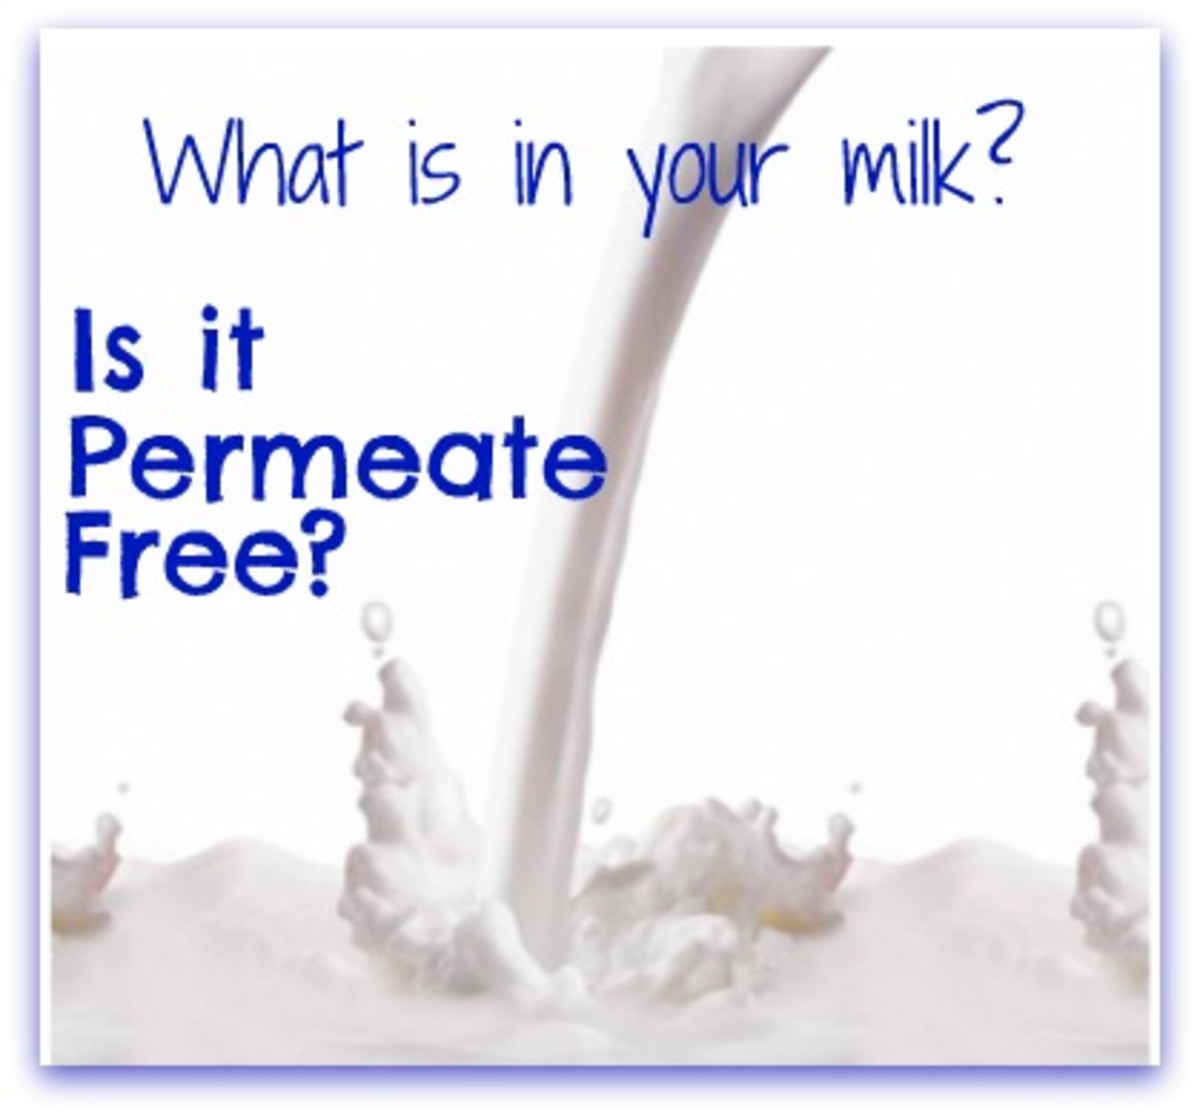 What Does Naturally Permeate Free Milk Mean? Why Is Permeate Bad?